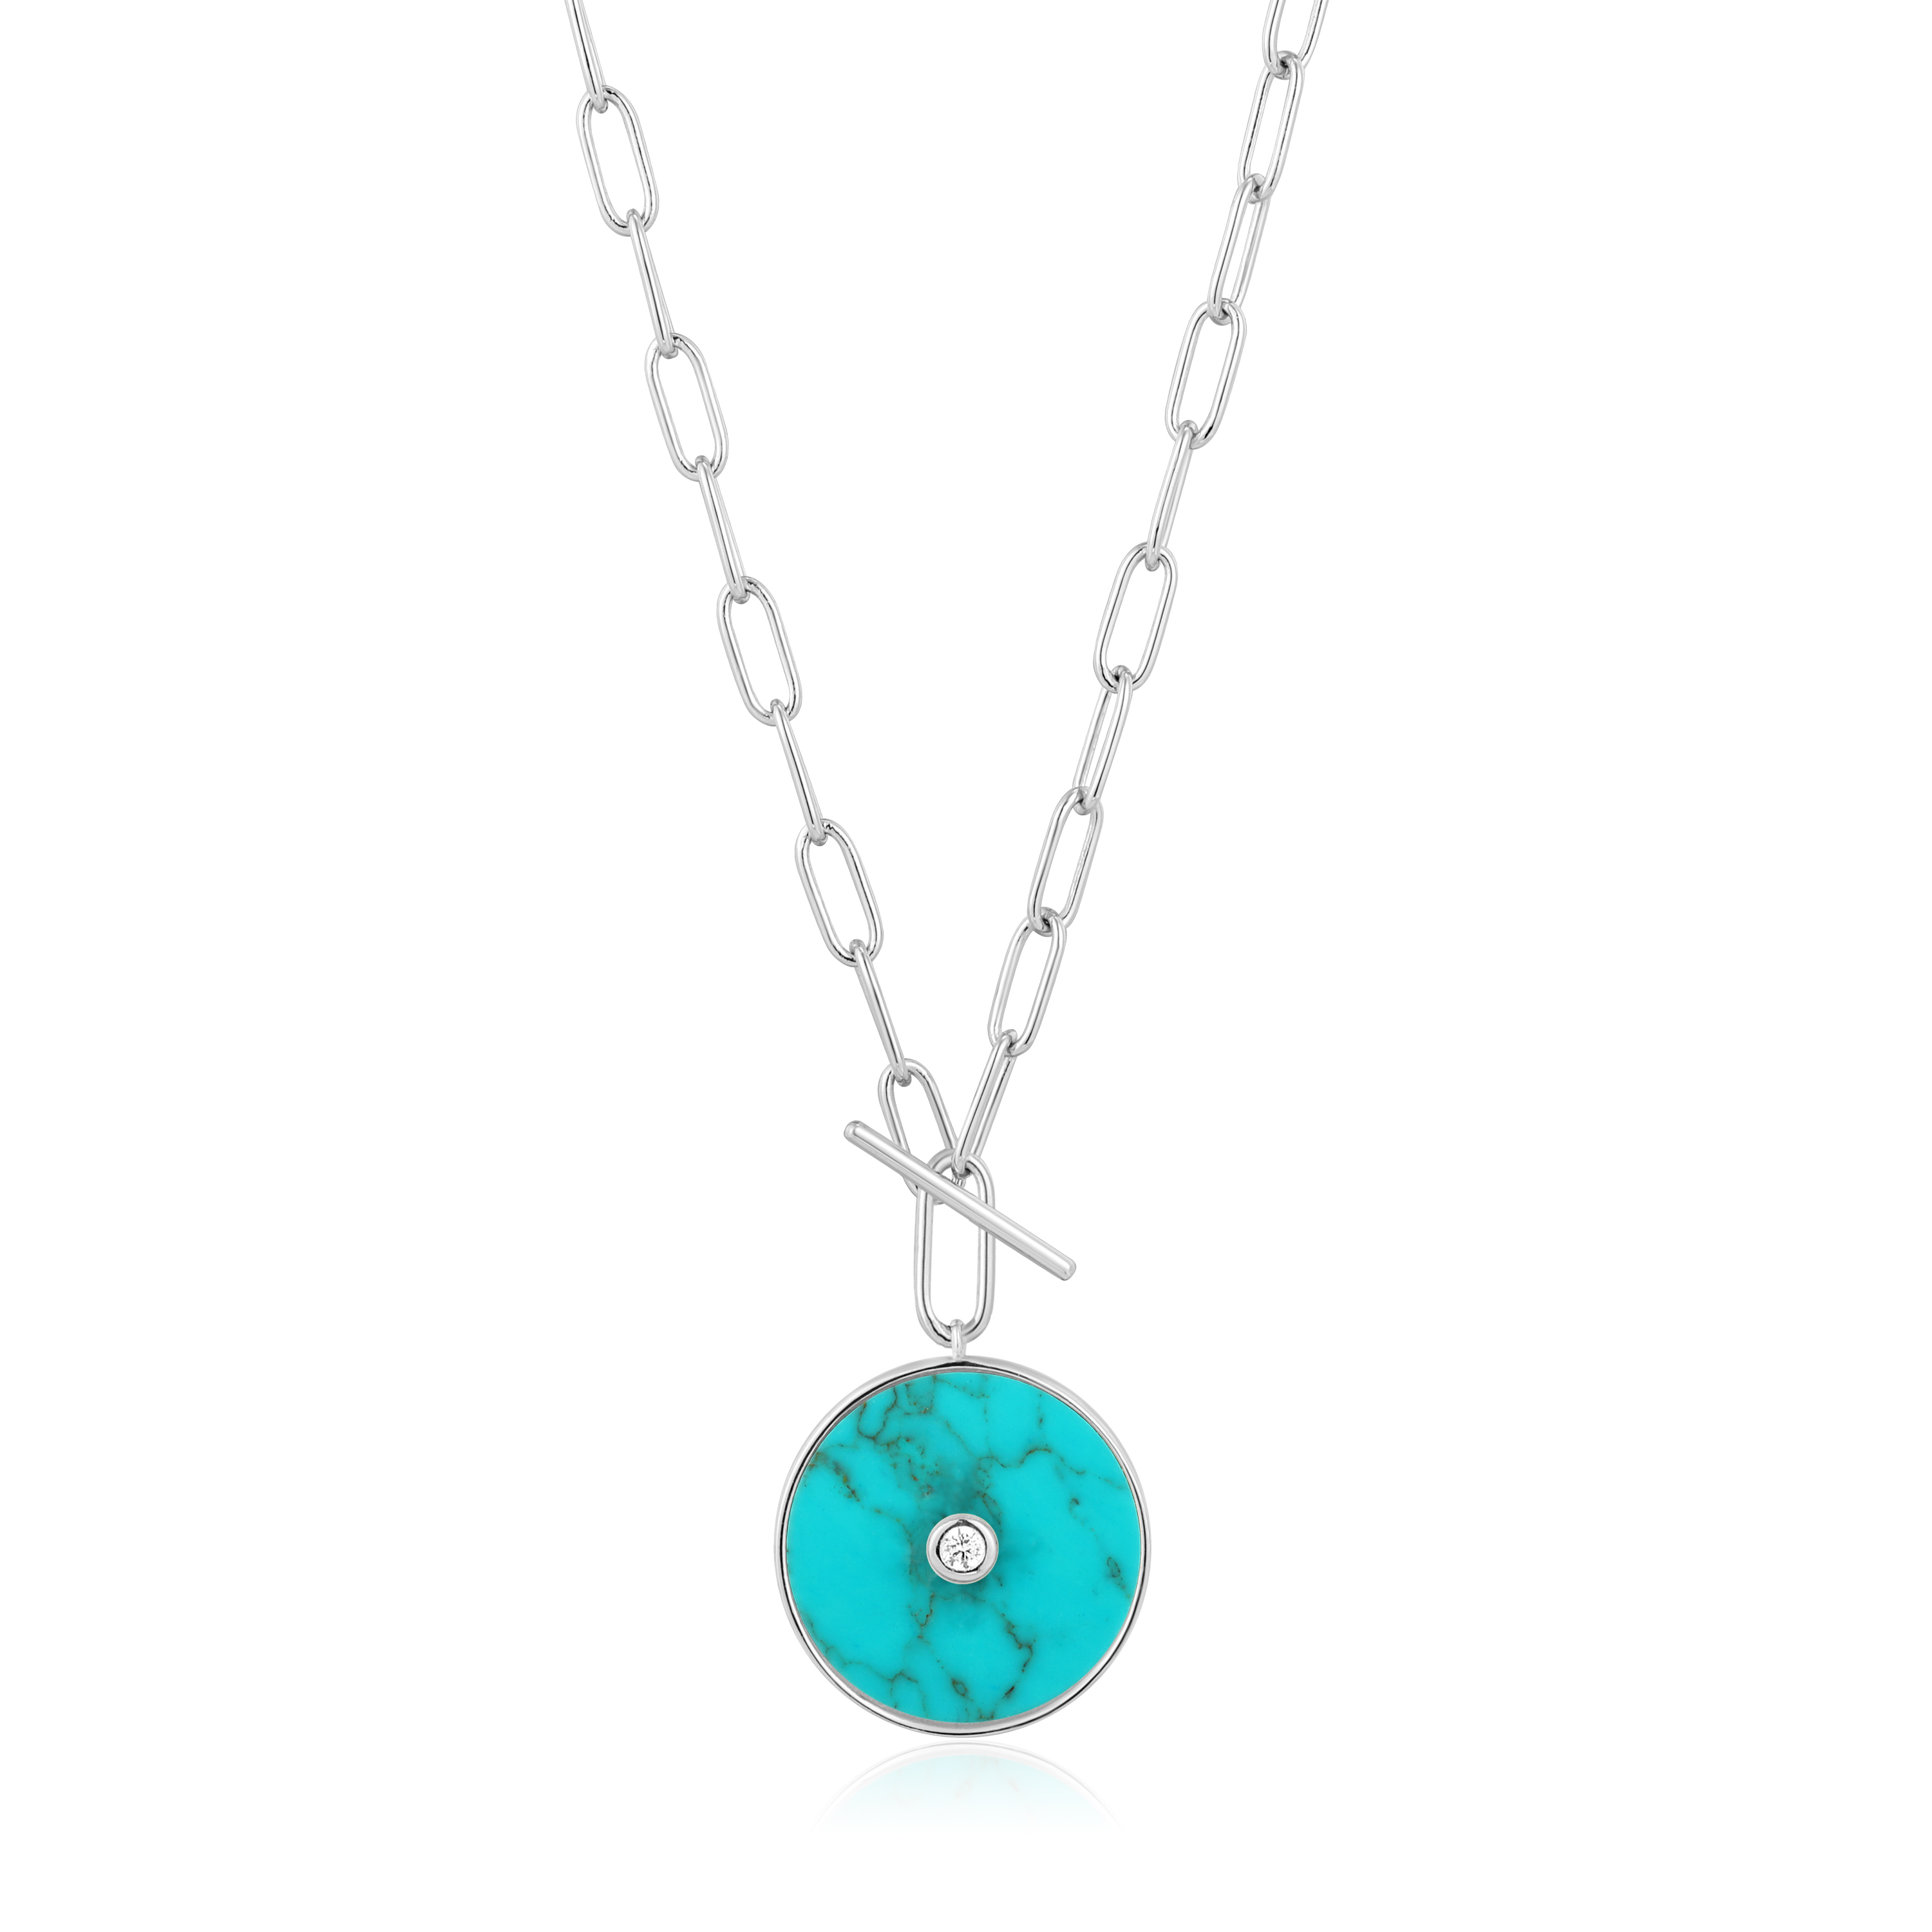 Silver Turquoise T-Bar Necklace